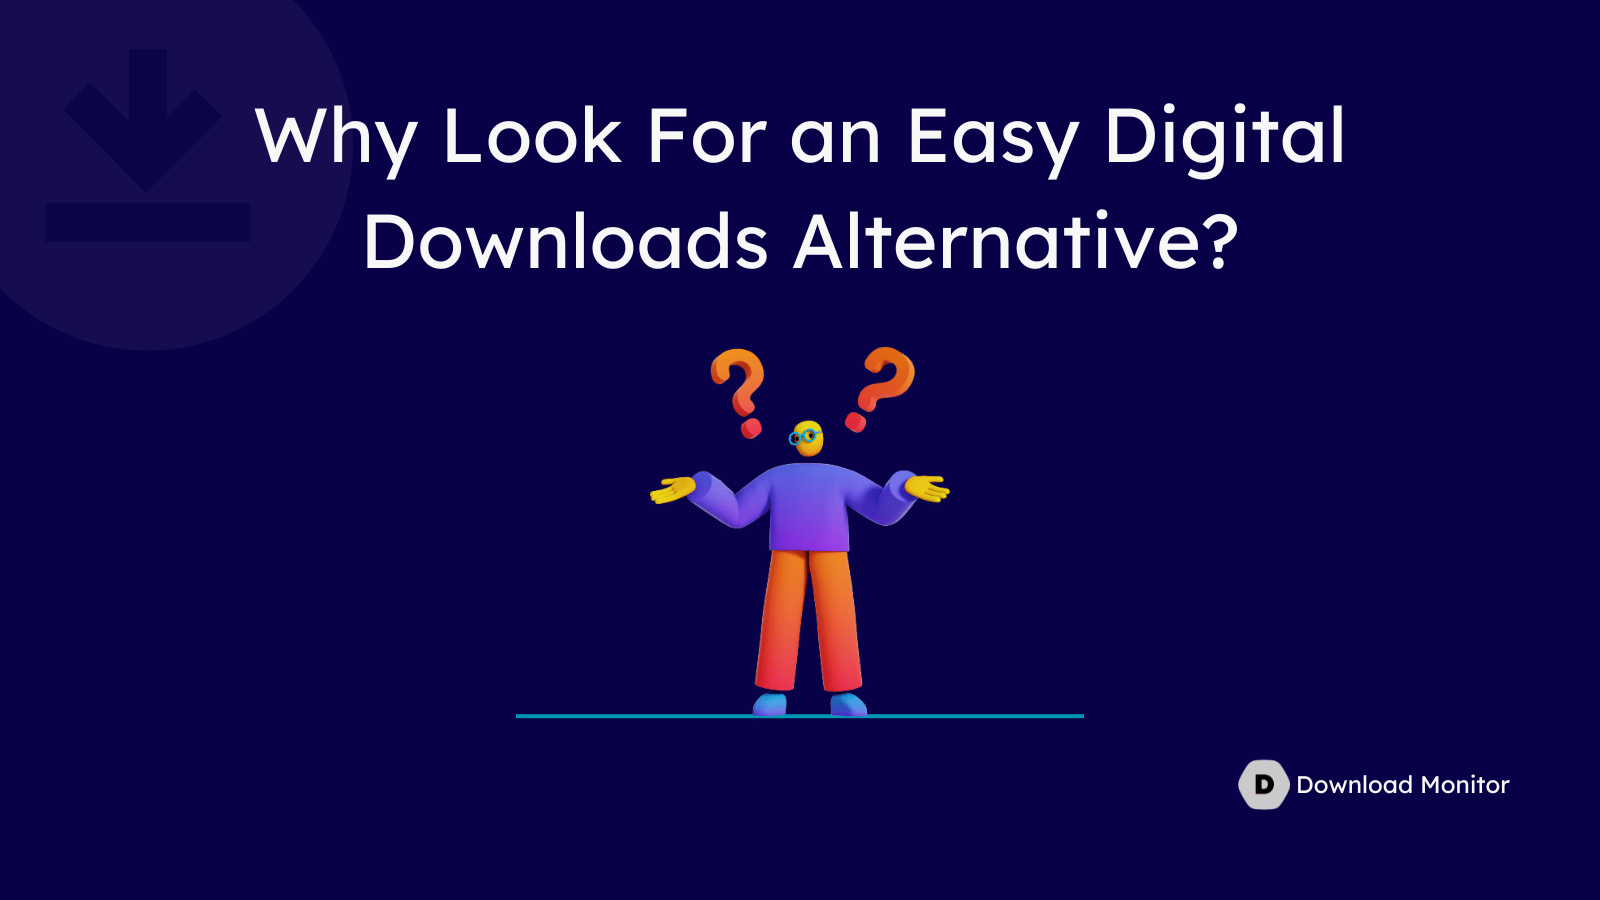 Why Look For an Easy Digital Downloads Alternative